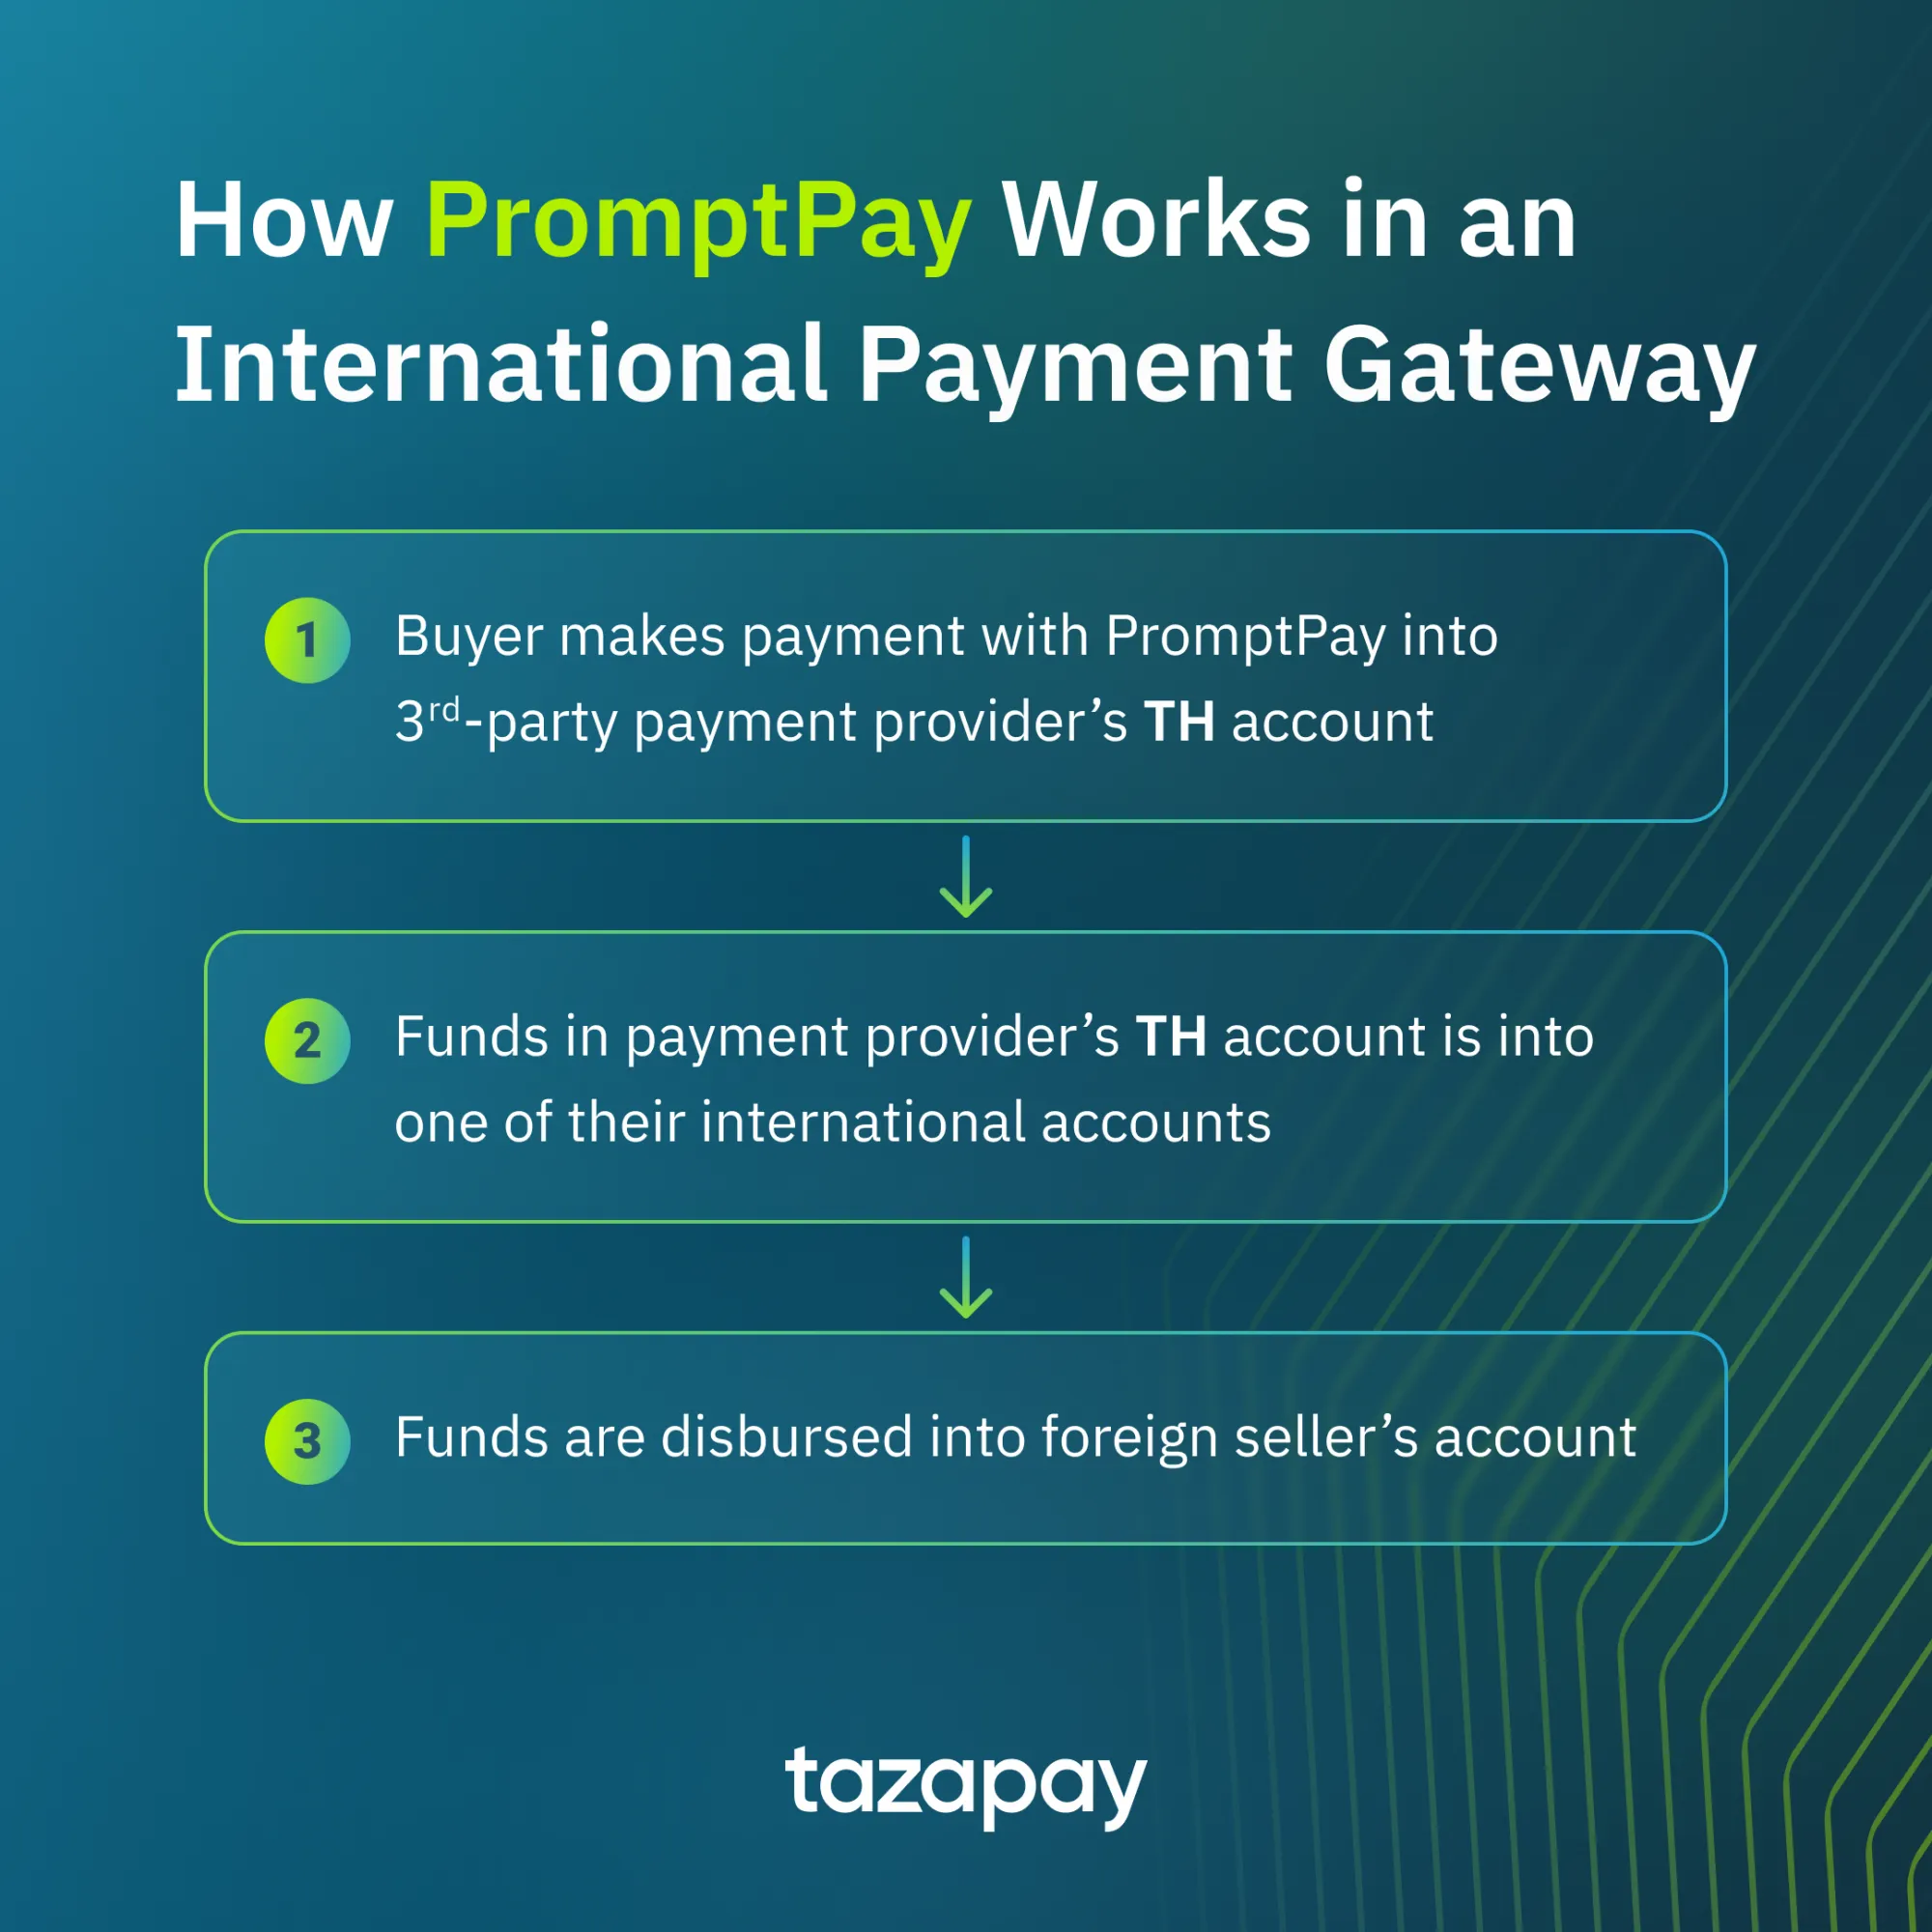 How promptpay works in an International payment gateway